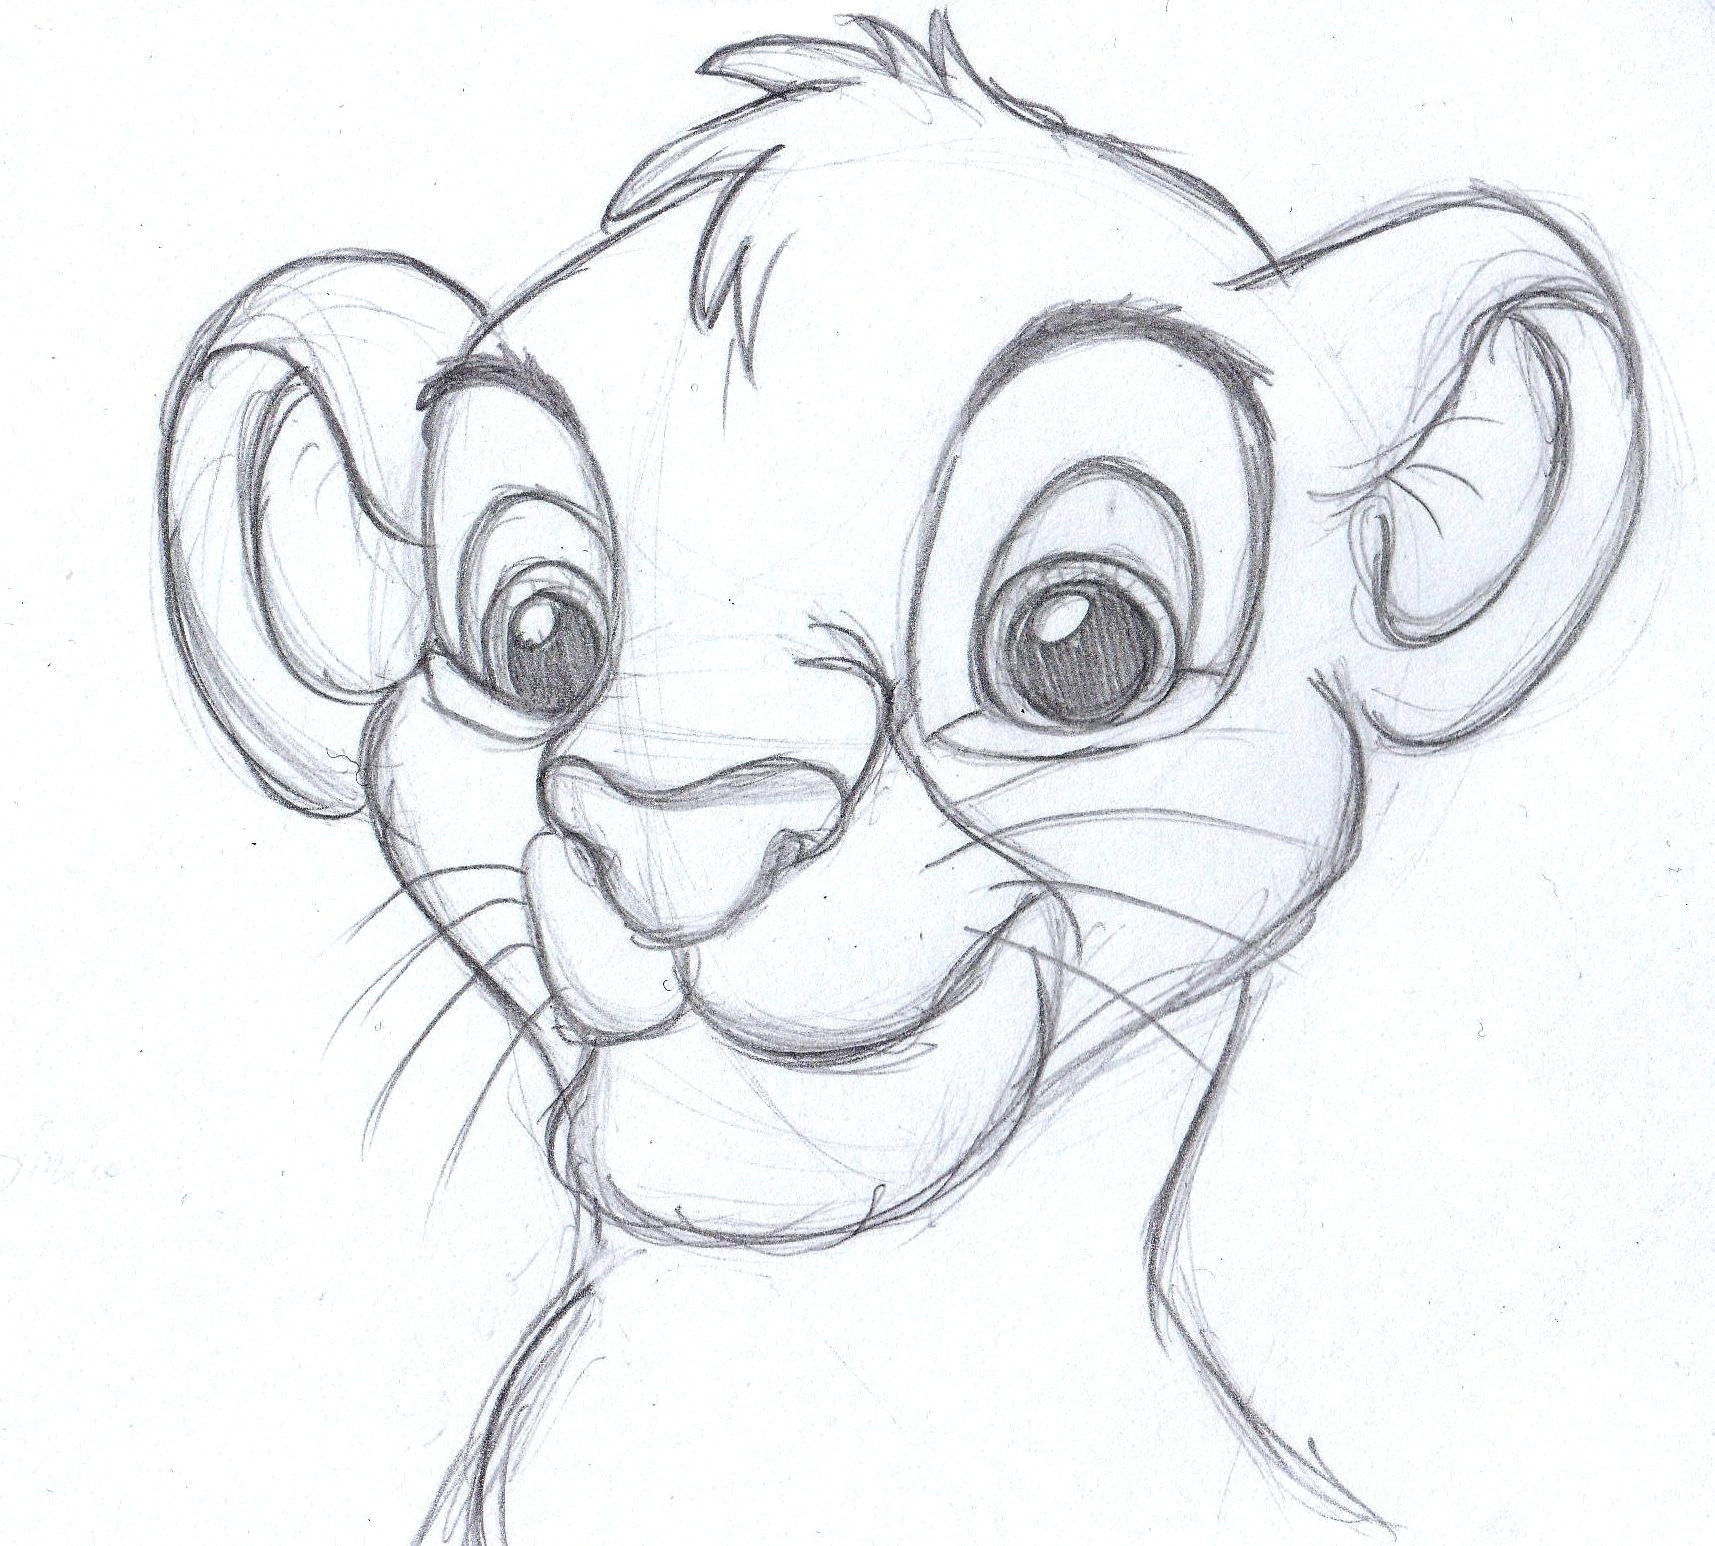 Drawing Ideas King the Lion King One Of My Favorite Movies Disney Animation In 2019